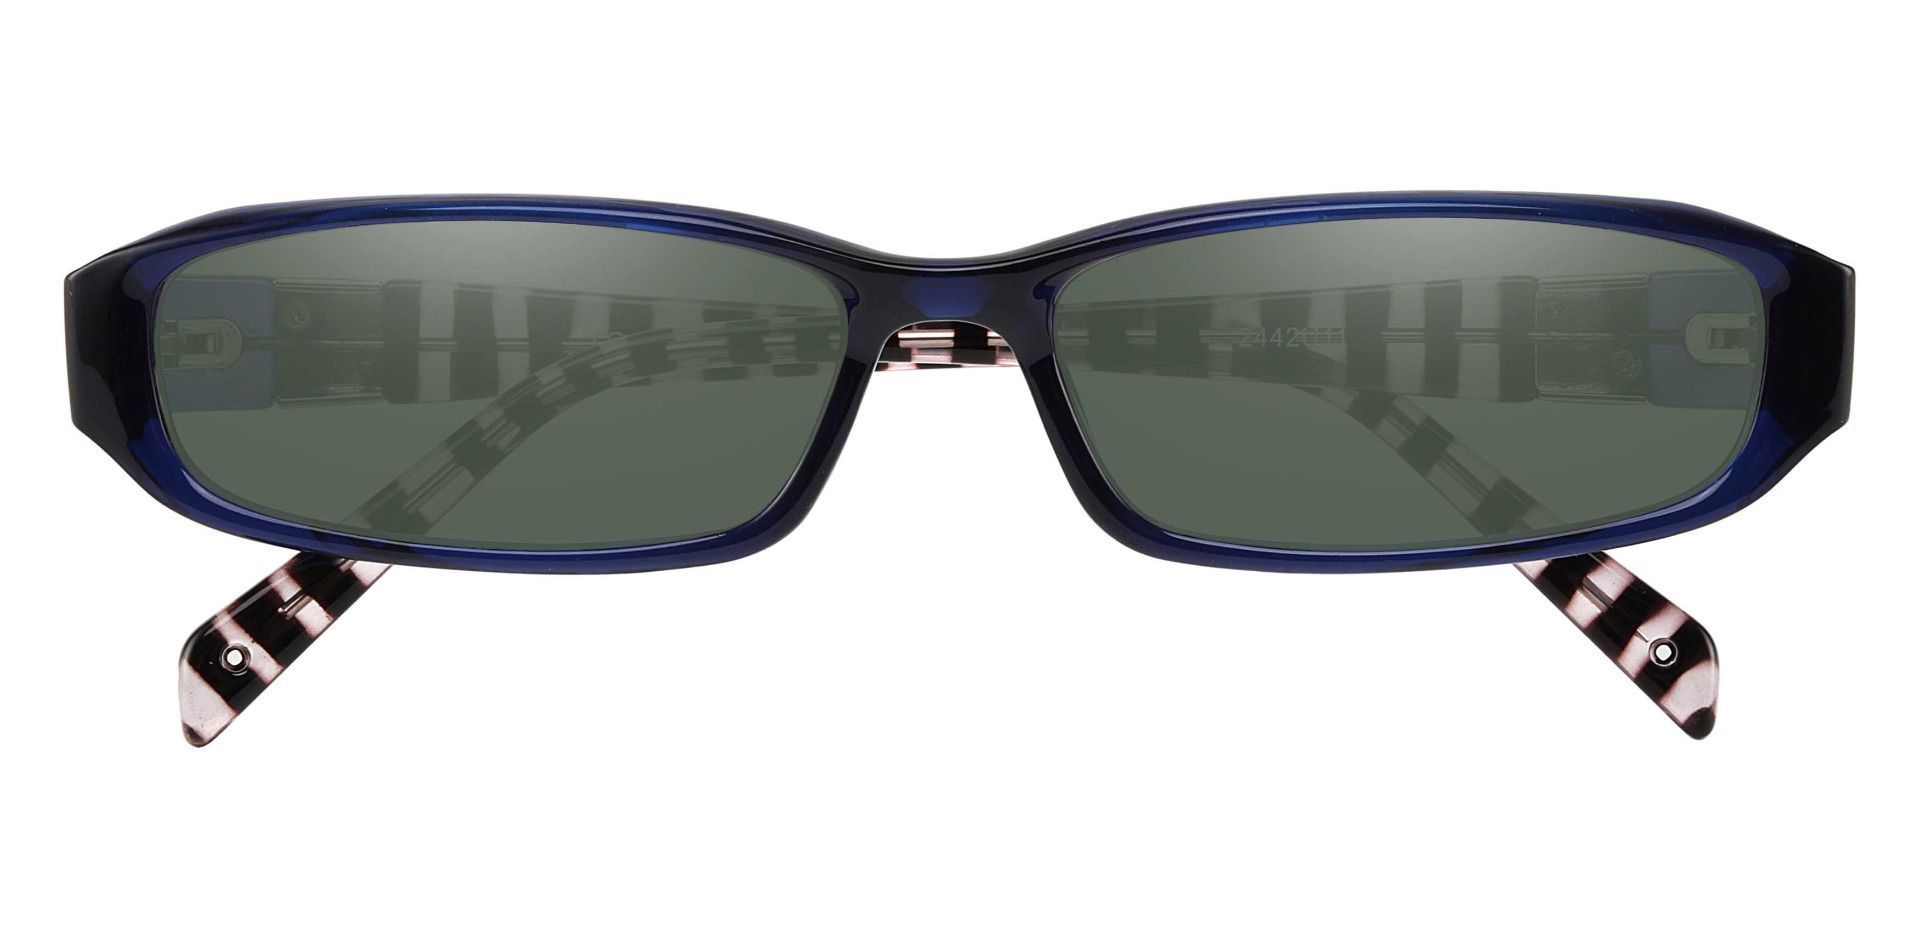 Mulberry Rectangle Non-Rx Sunglasses - Blue Frame With Green Lenses